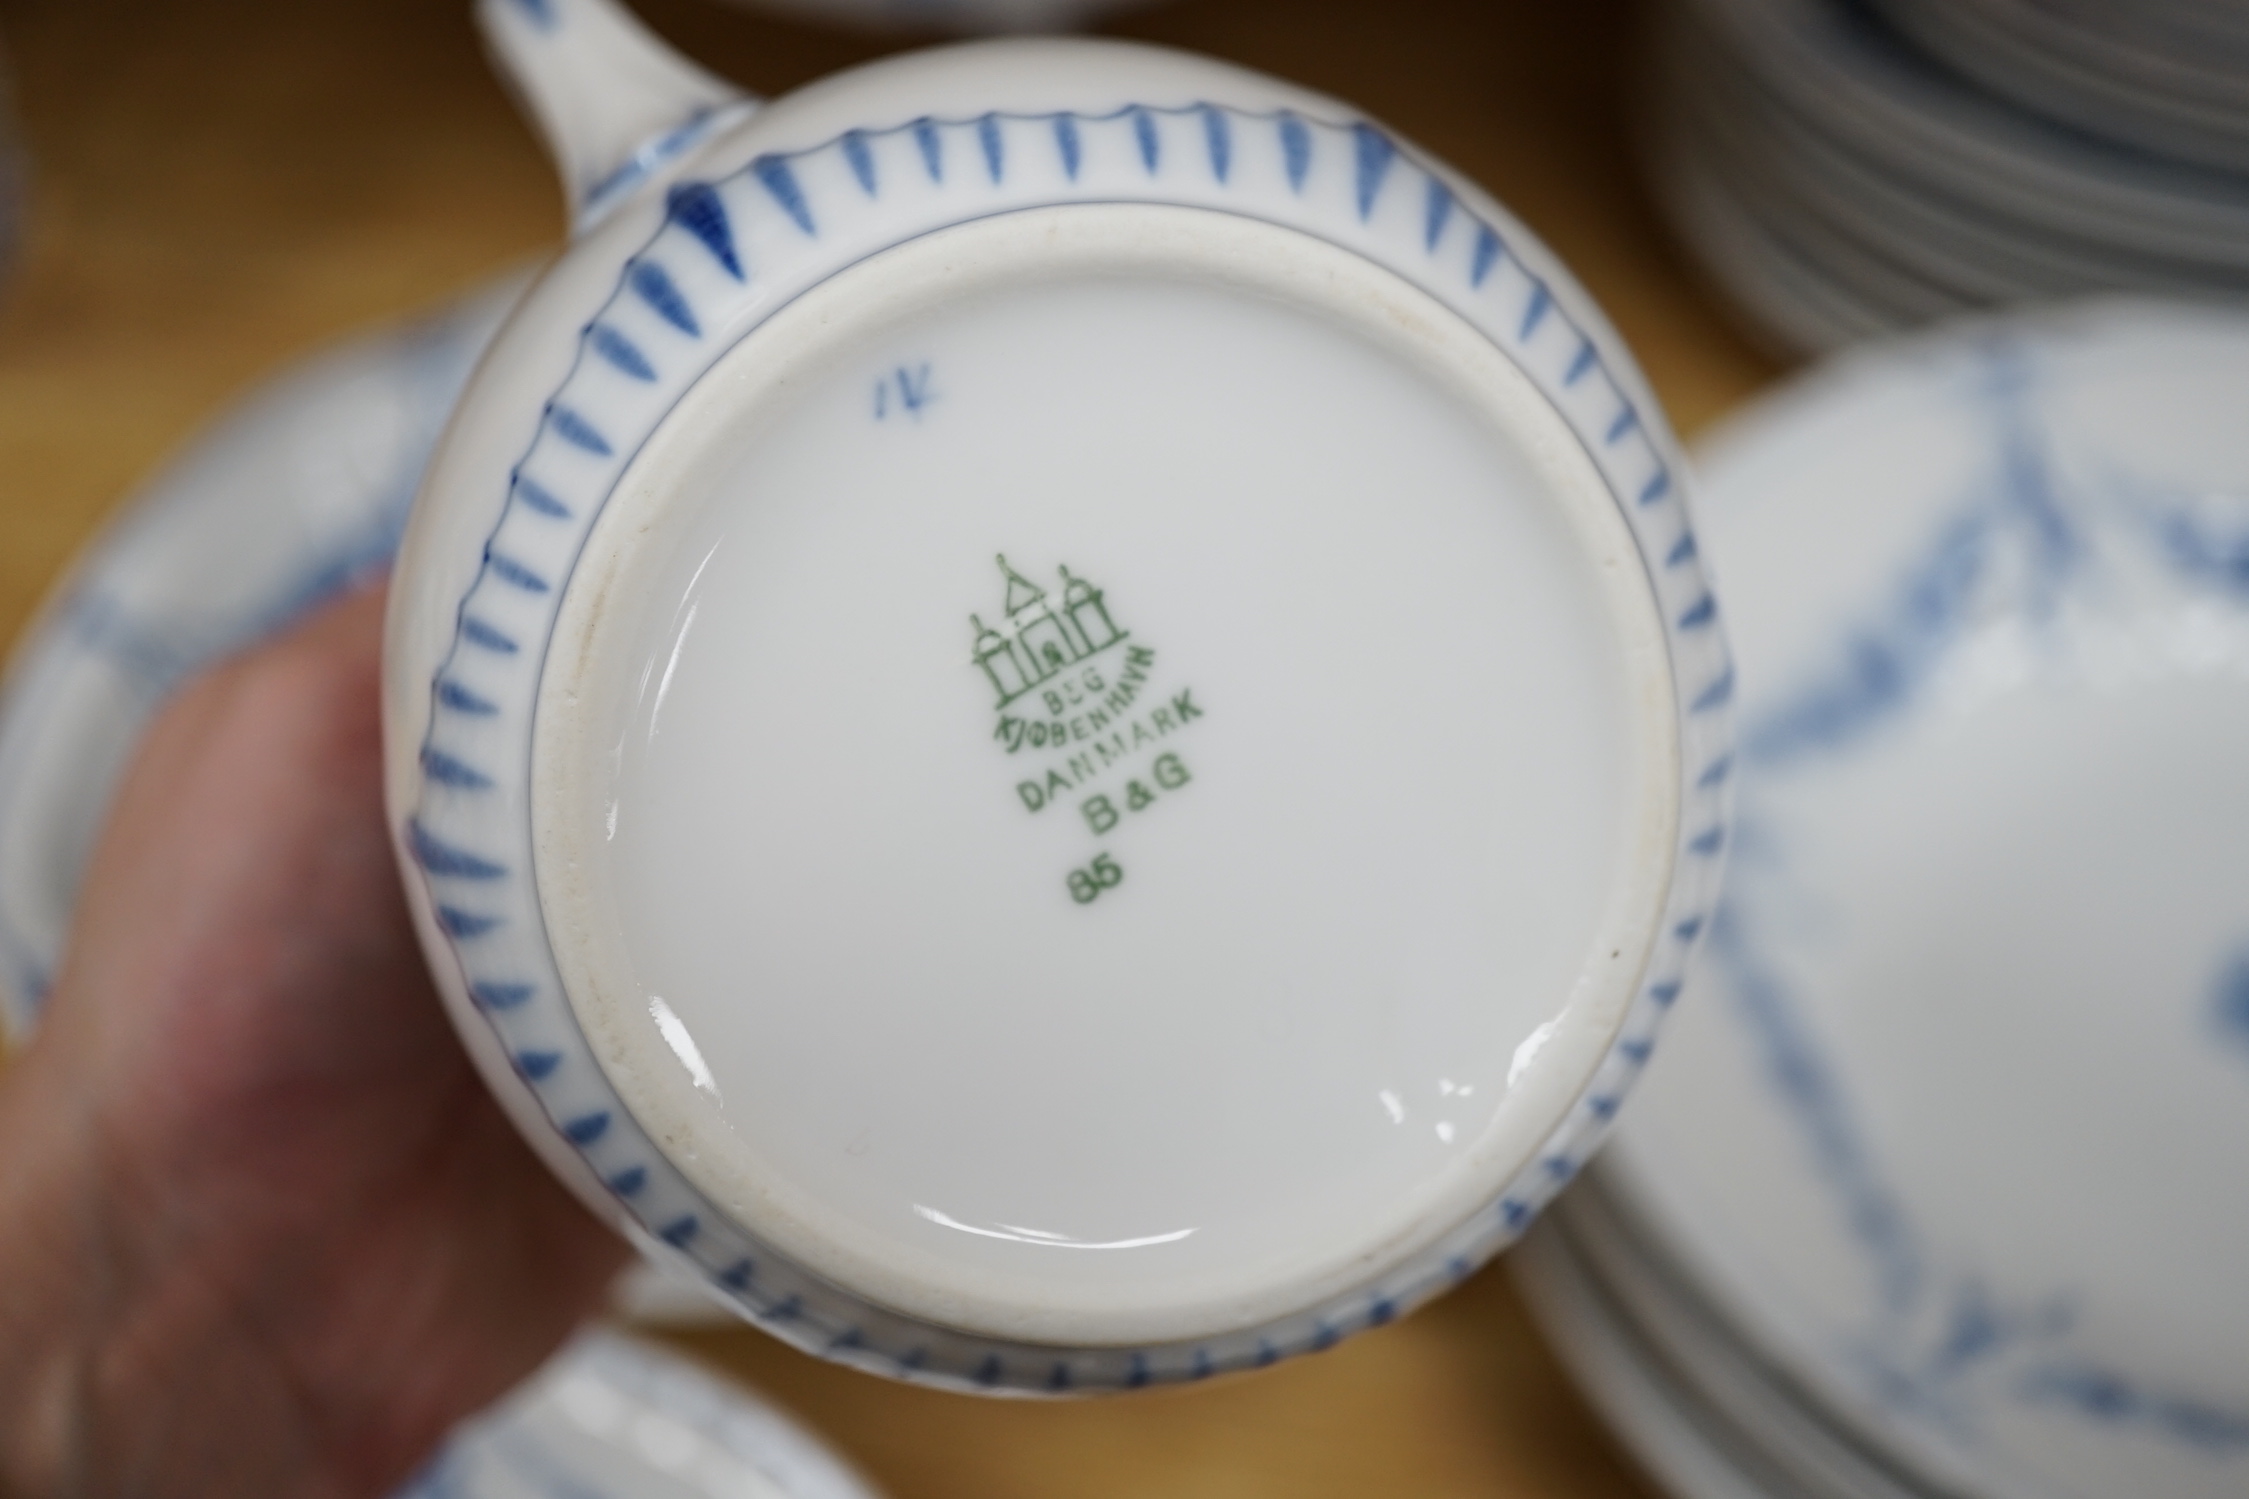 A Bing and Grondahl, Denmark blue and white ‘Empire’ pattern dinner service, thirty-eight pieces including; a cake, stand, candlestick, dinner, plates, jug, serving, dishes, etc.